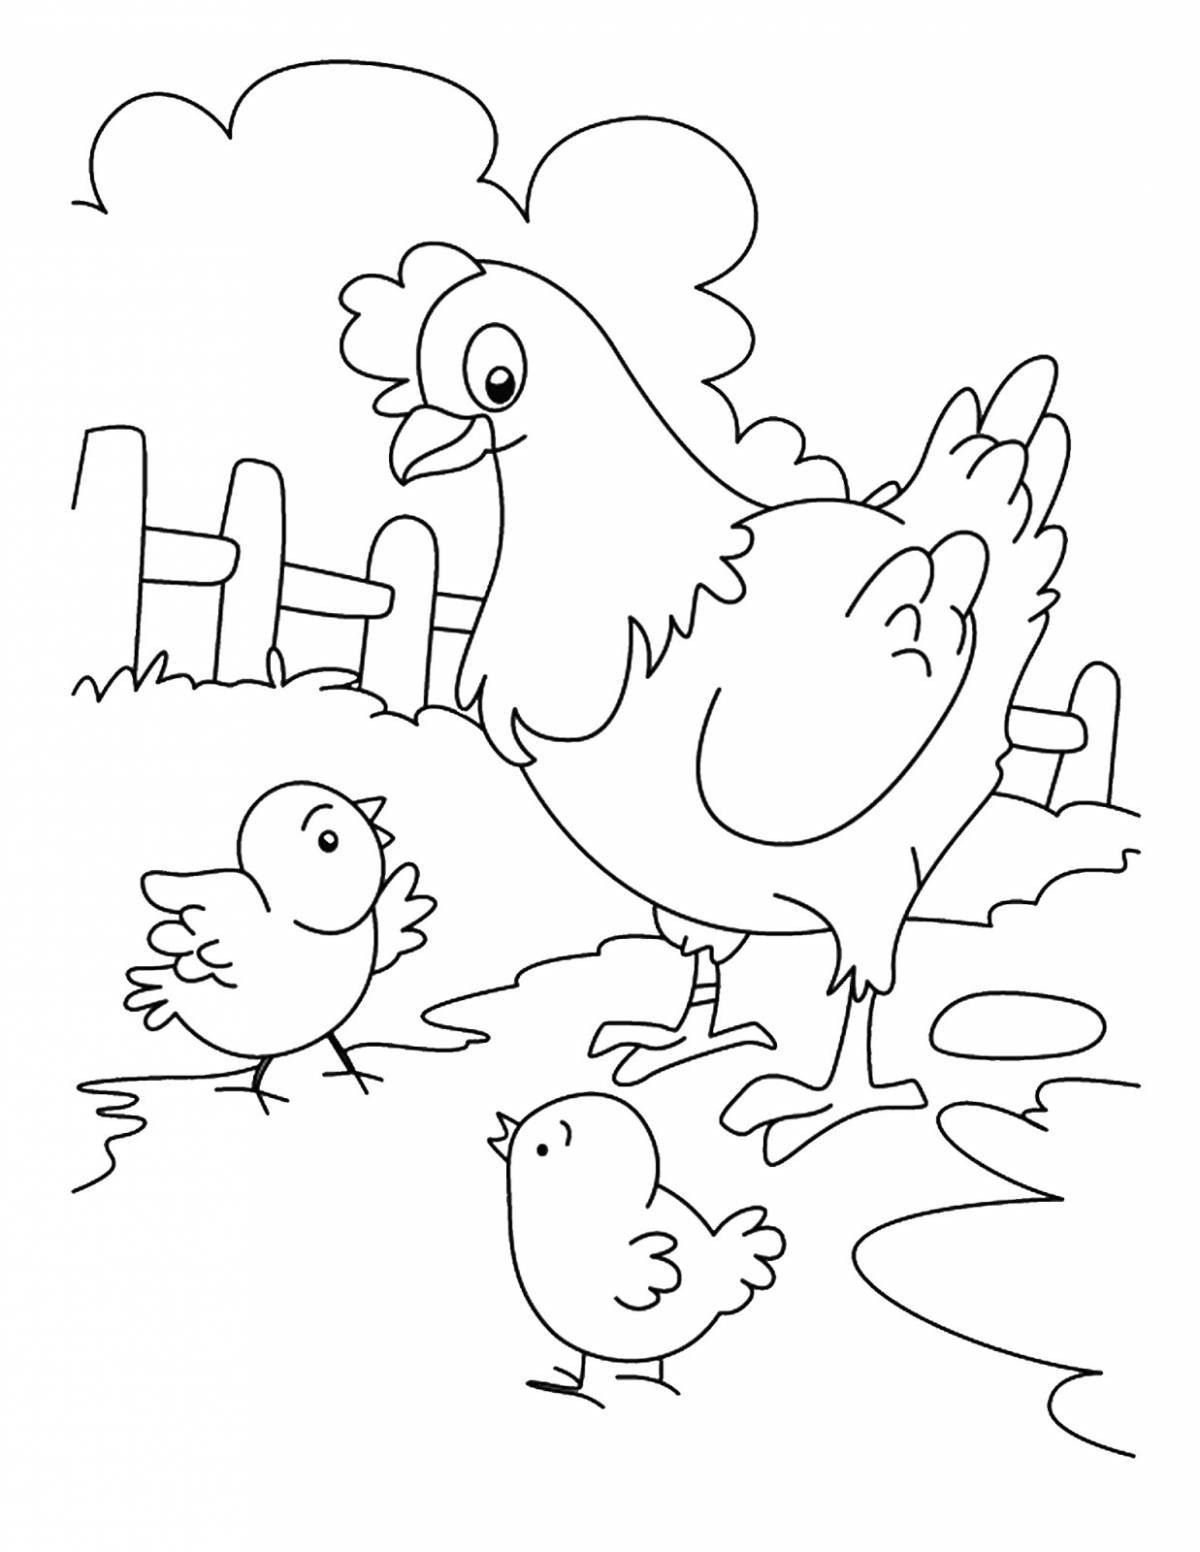 Coloring funny chicken for kids